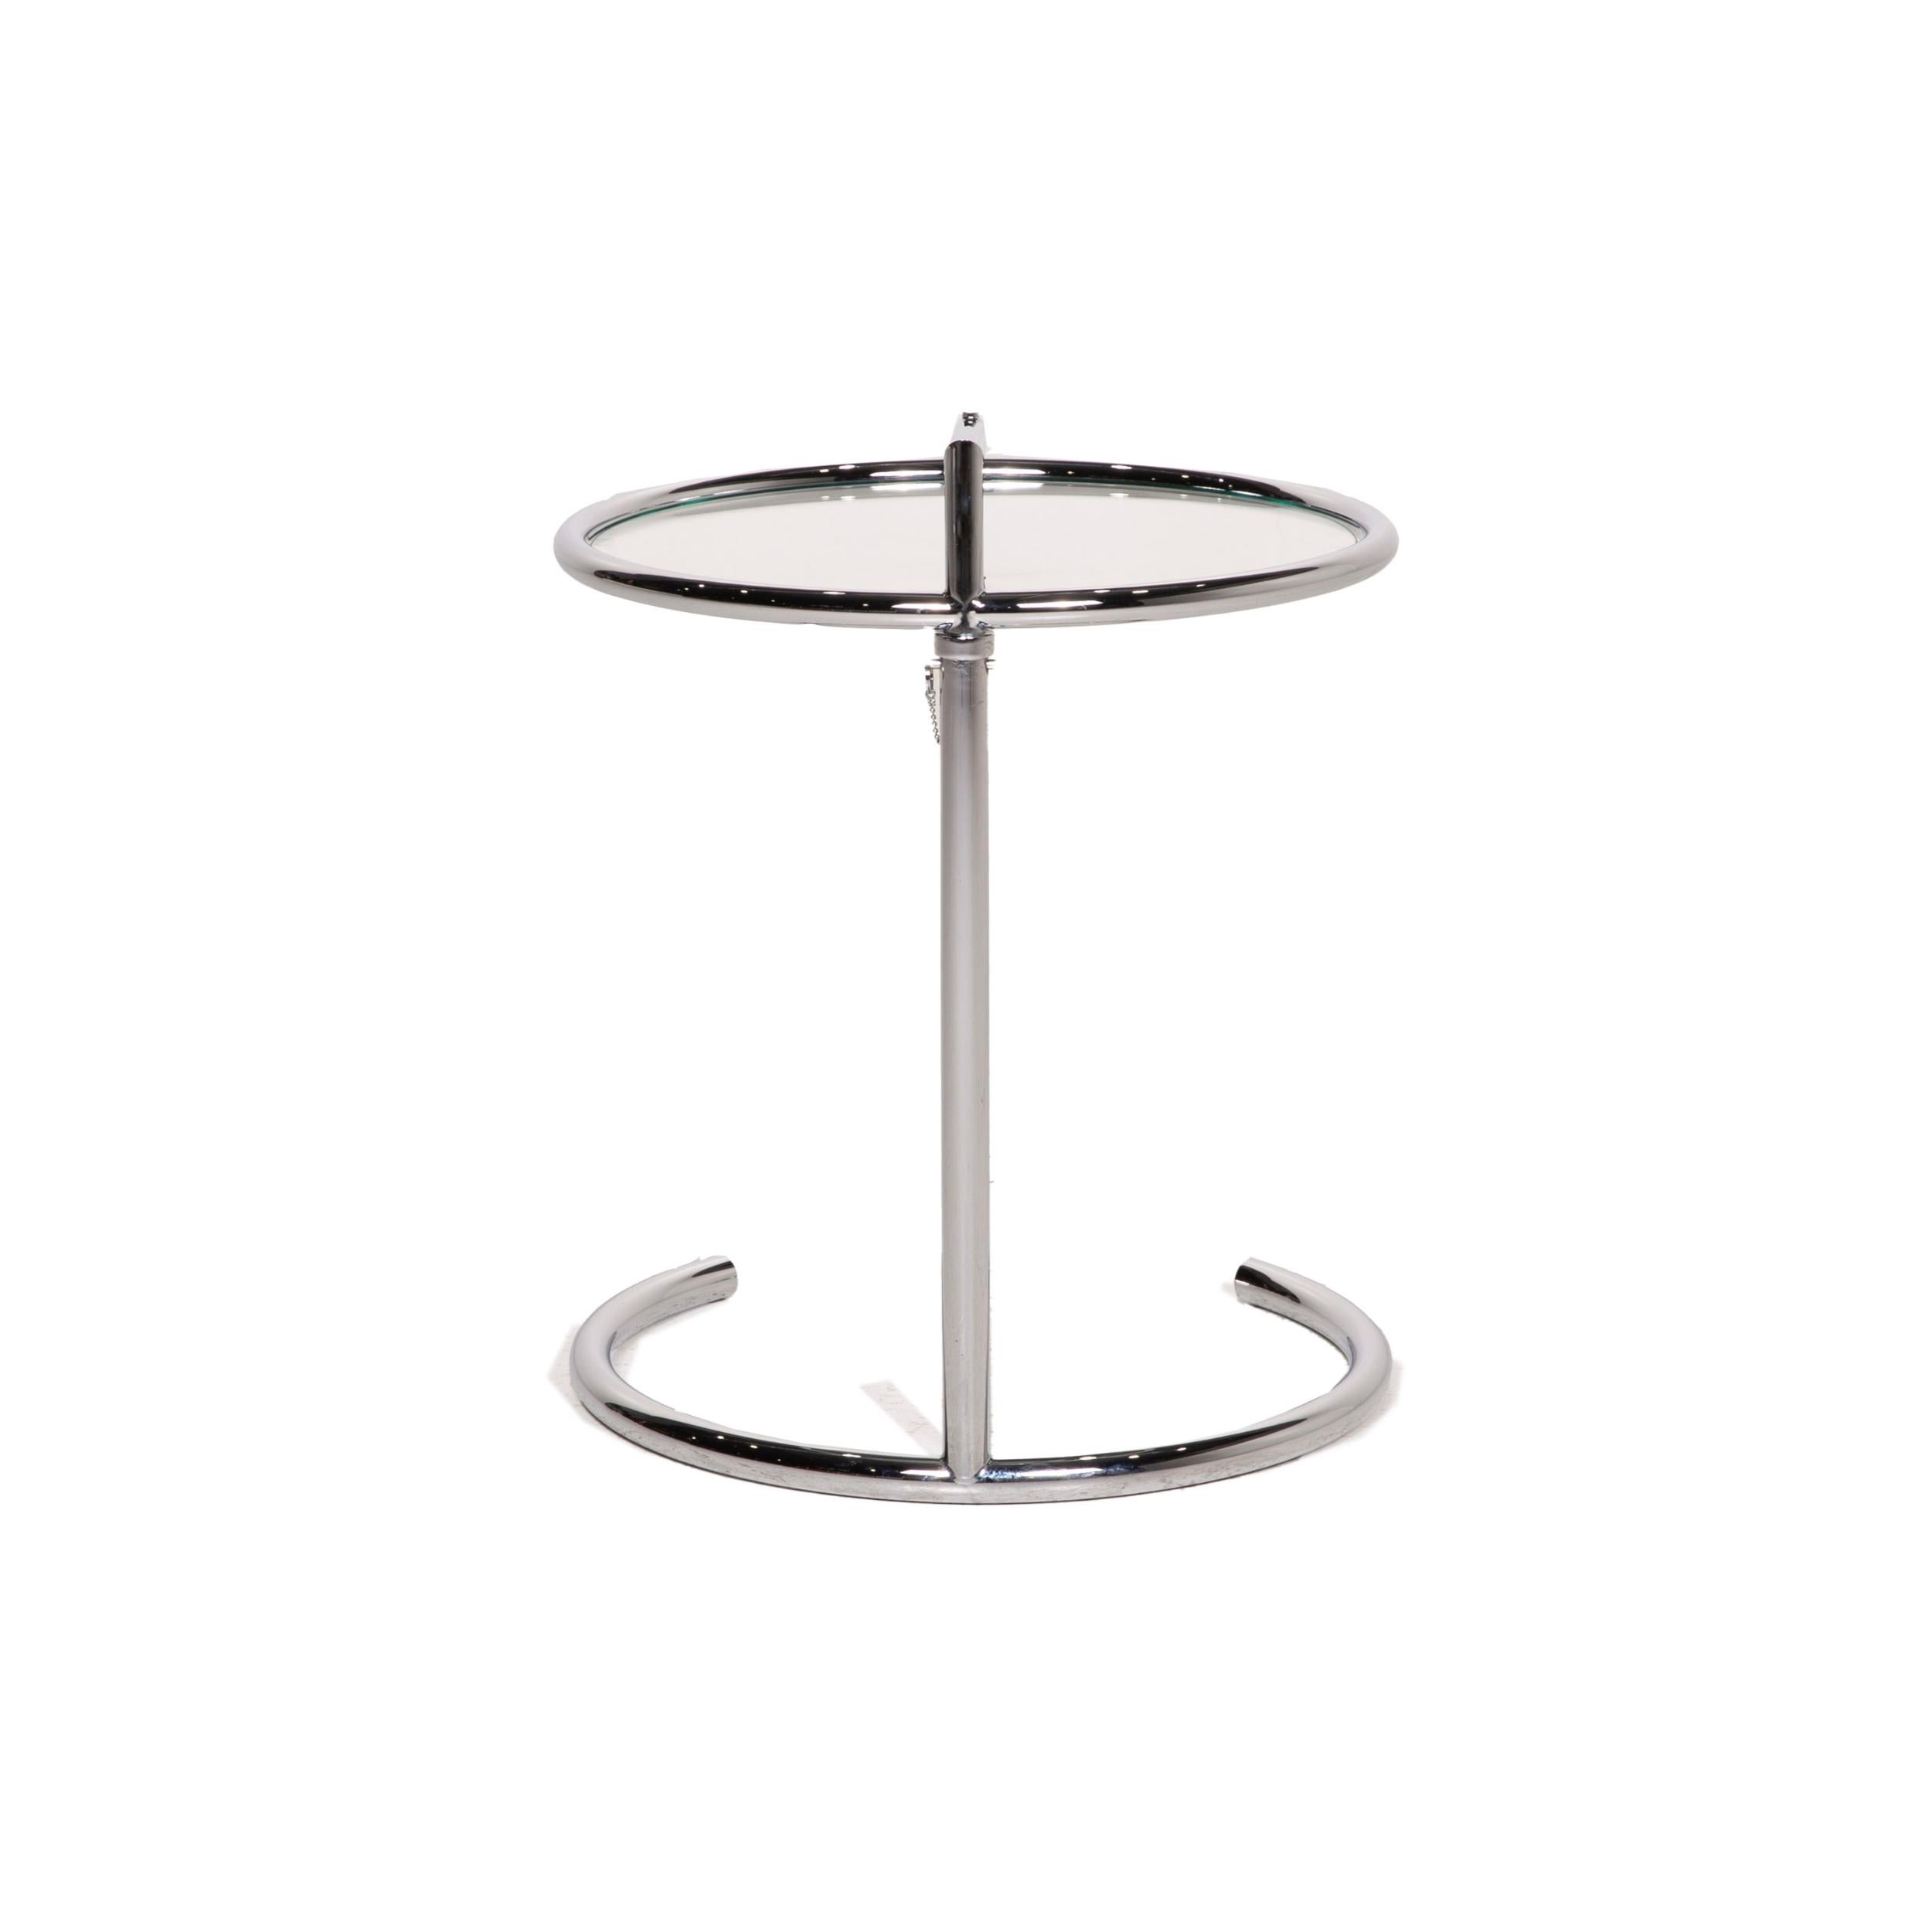 Metal ClassiCon Adjustable Table E1027 Glass Table Side Table Chrome by Eileen Gray